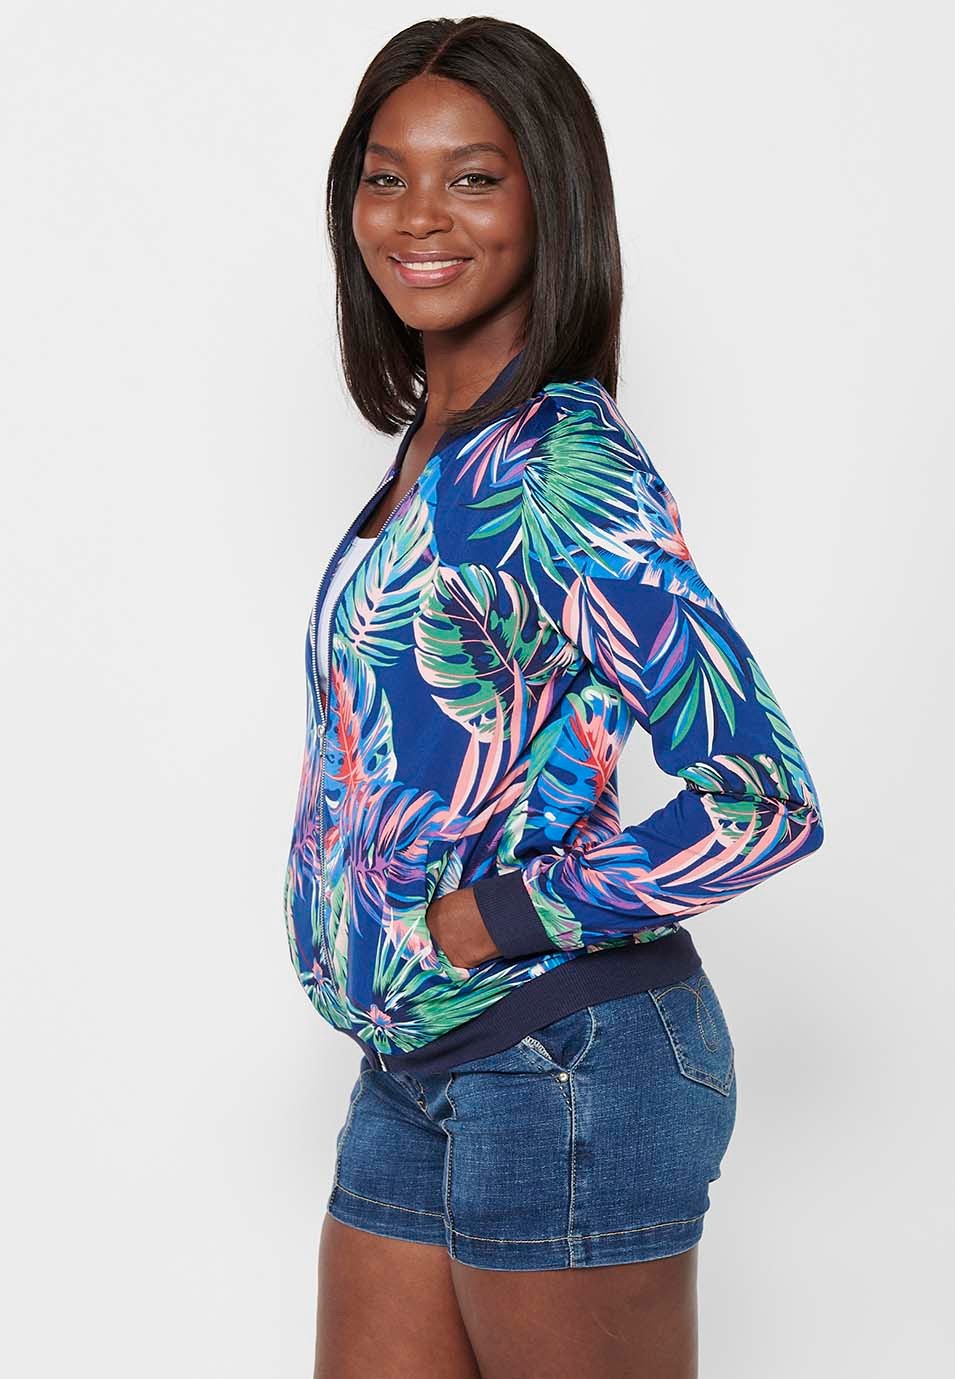 Long-sleeved sweatshirt jacket with blue floral print for women